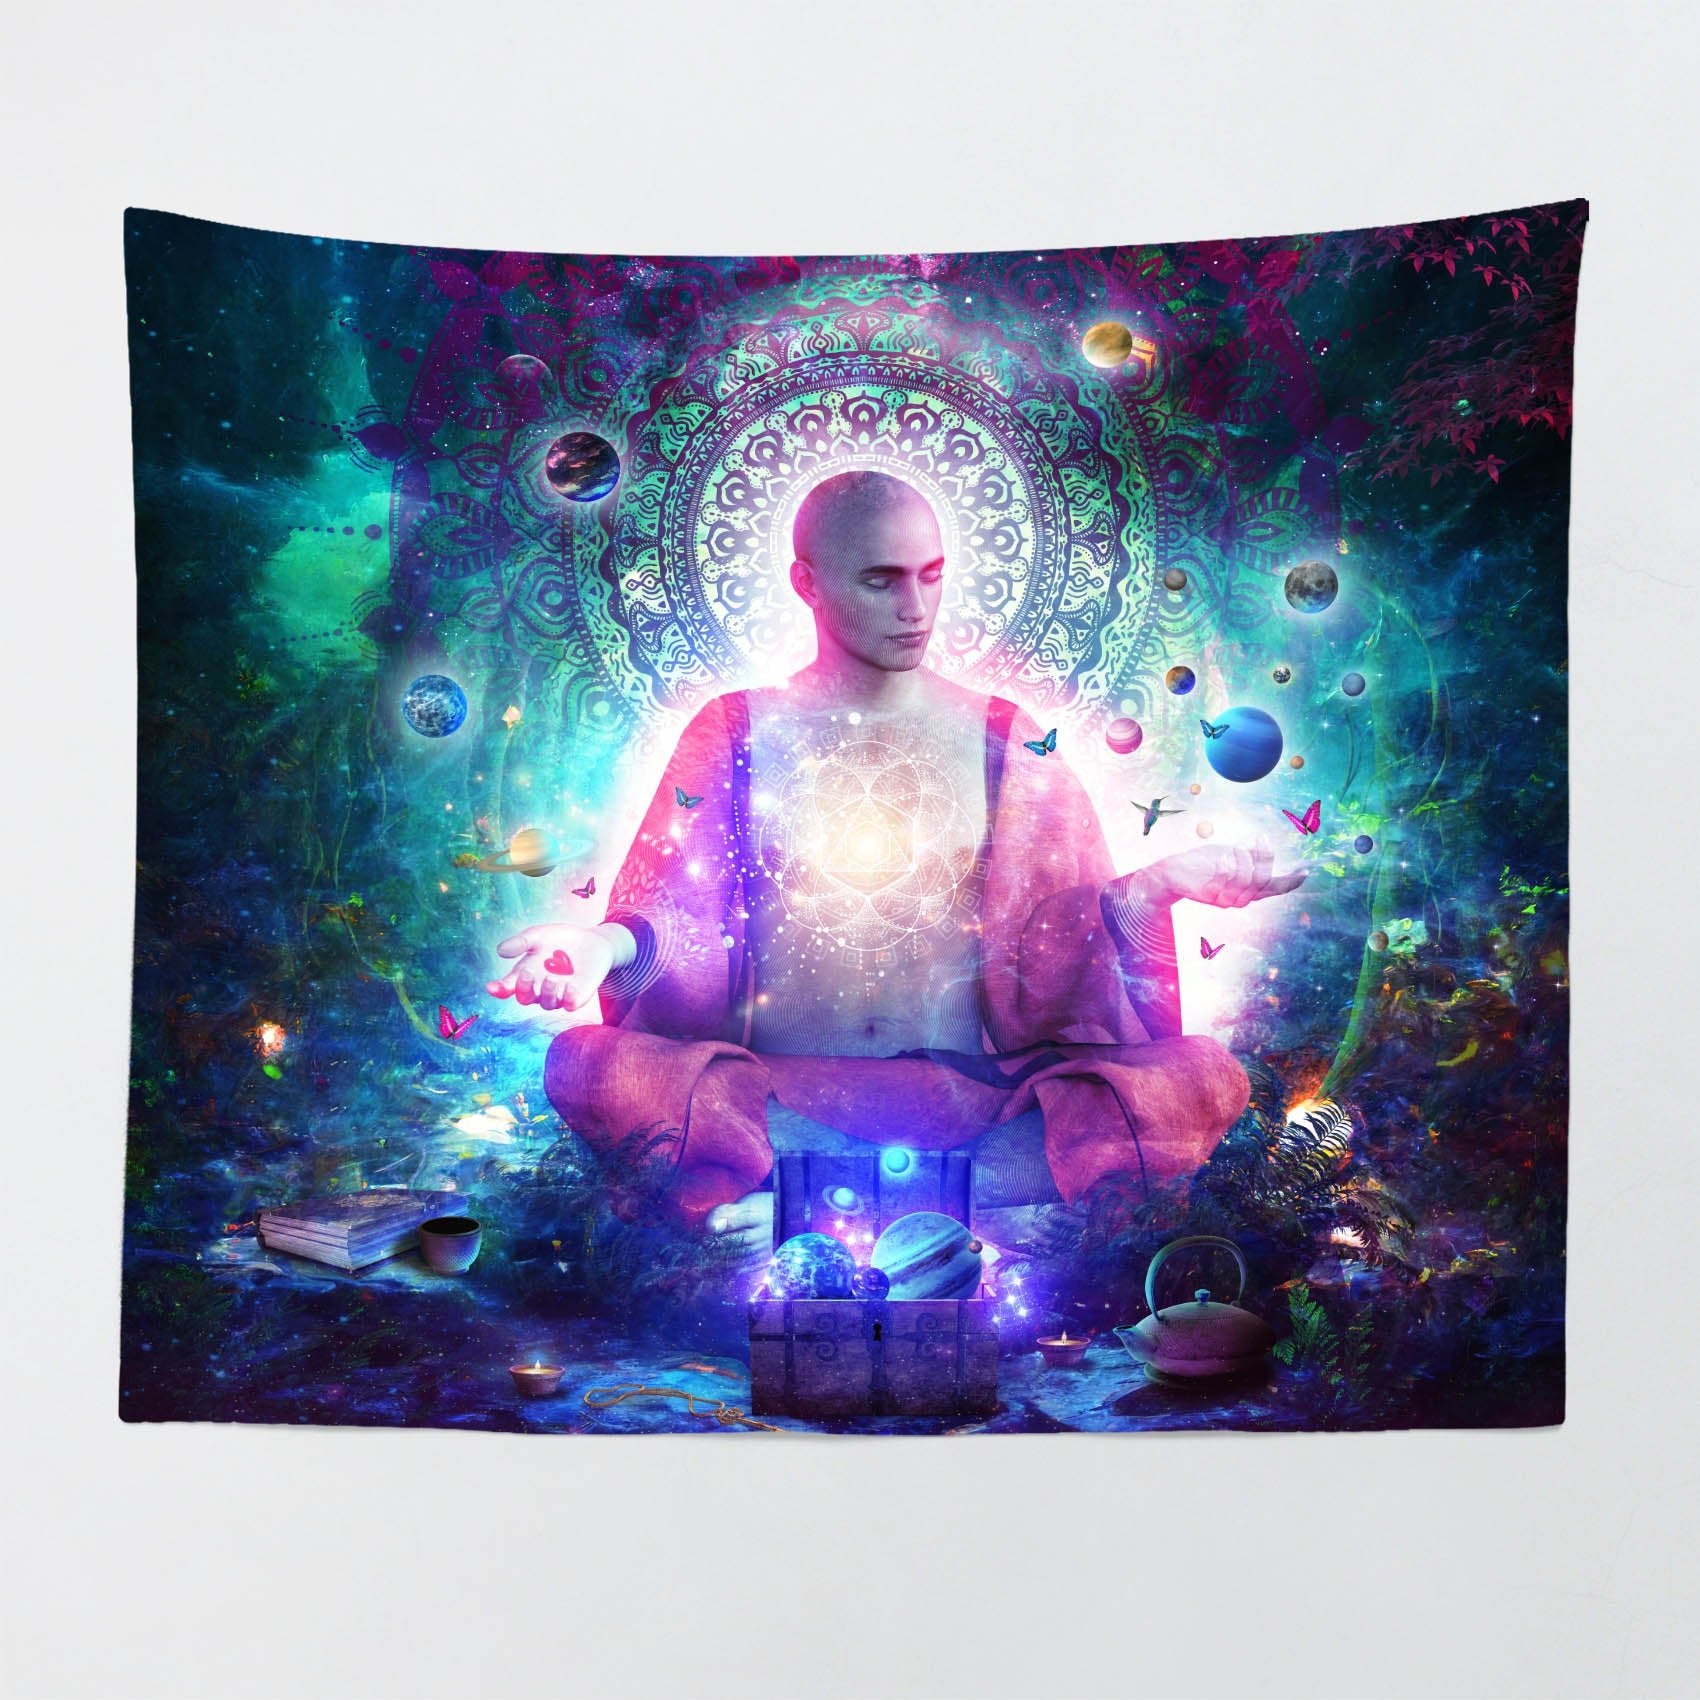 Mindfulness - Visionary art psychedelic wall tapestries by Cameron Gray